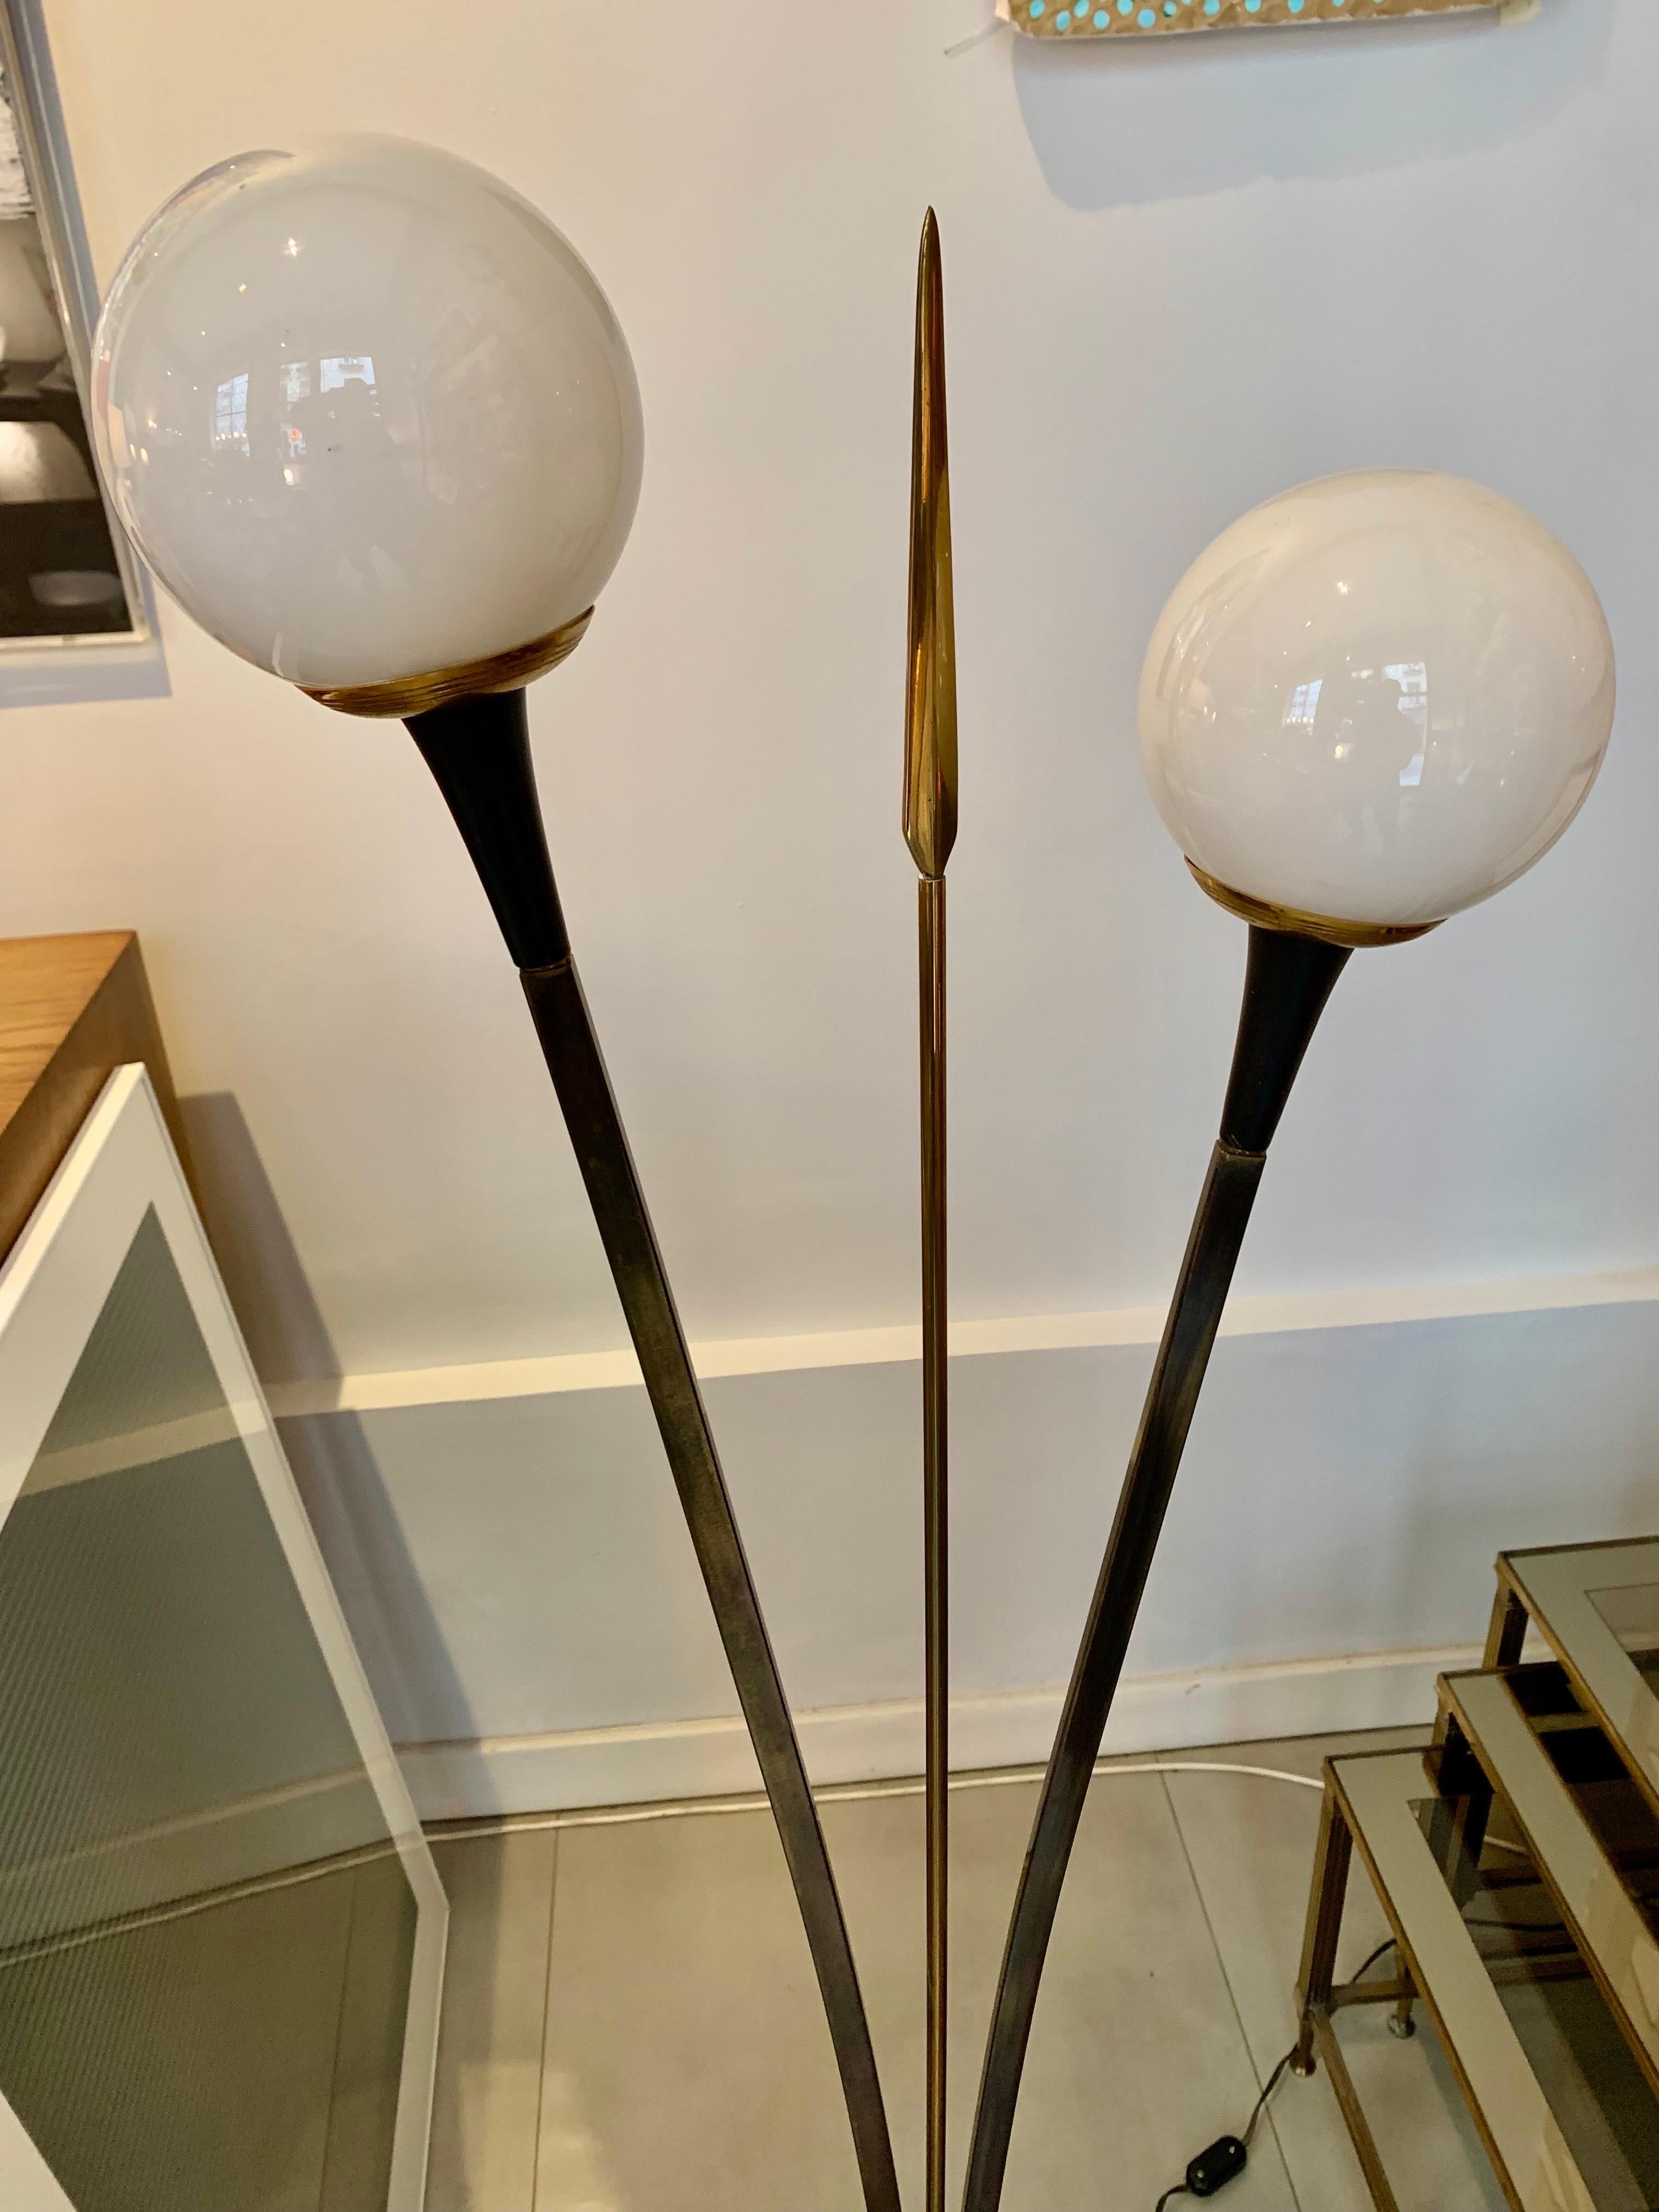 Lamp from the early 1960s, by the French Maison Lunel, the lamp consists of three columns, two of which end in a circular white opline lampshade and the other with a glass ornament, it is made of gilded brass and lacquered metal. Its electrical